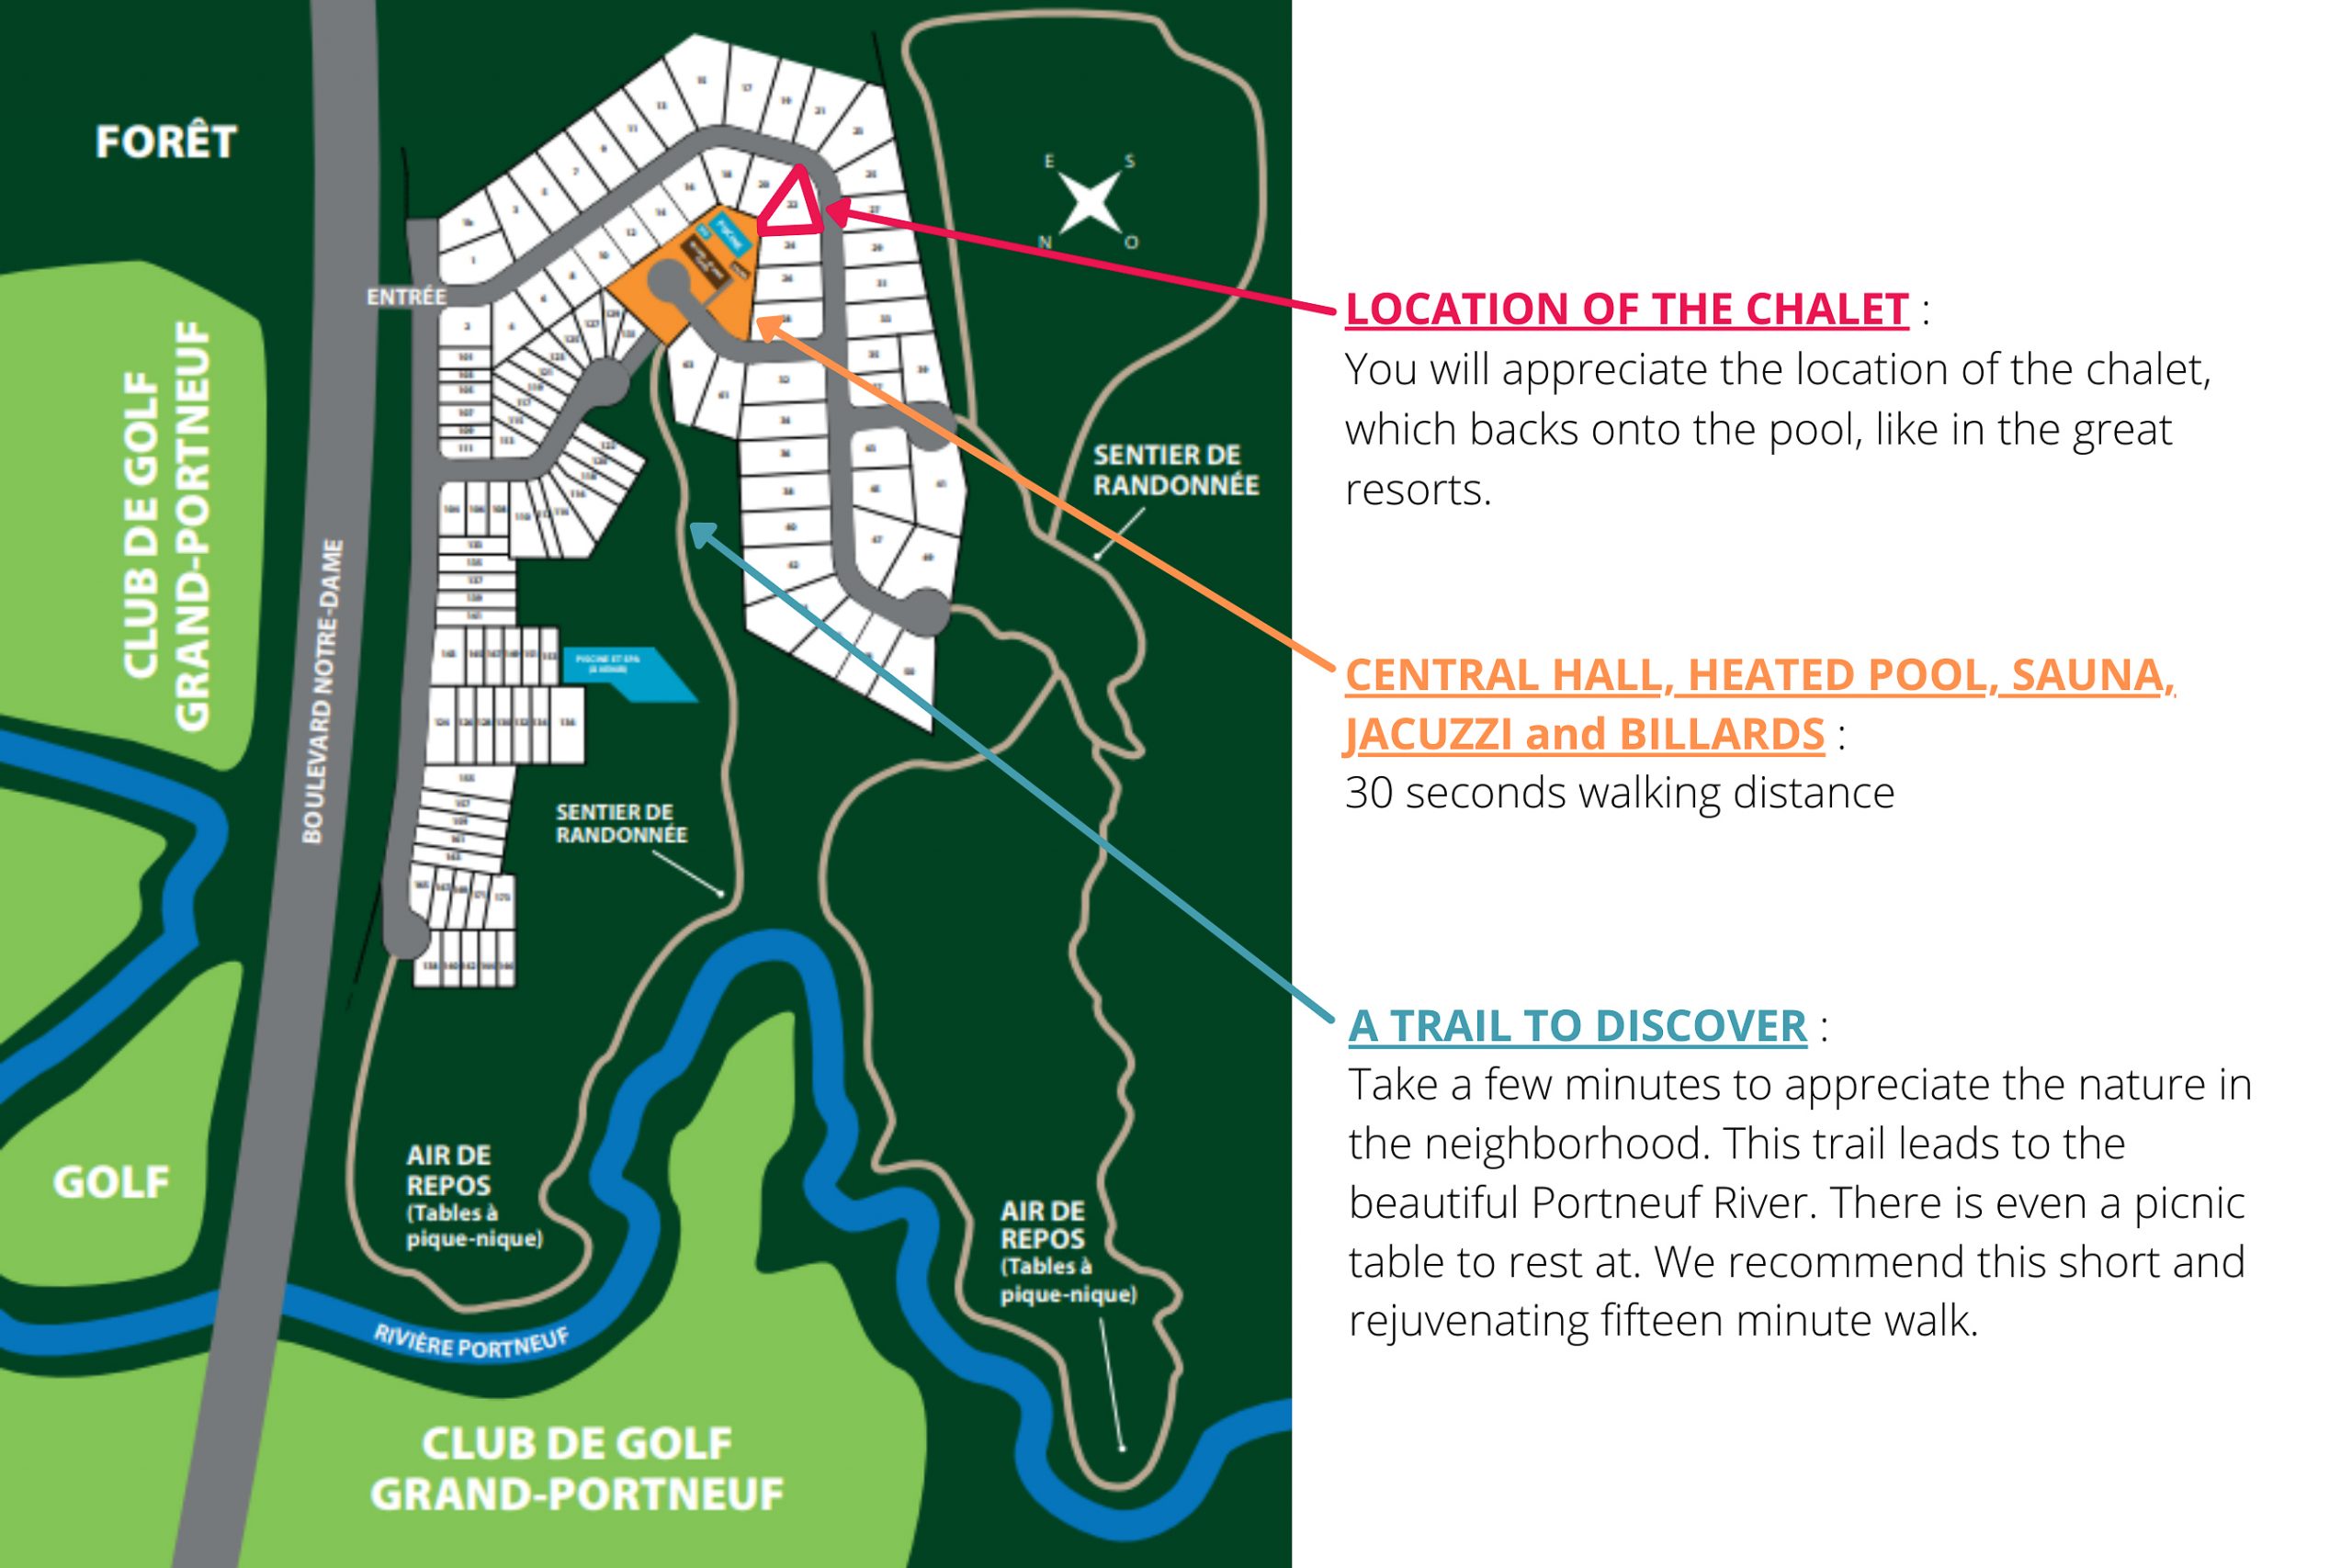 Location of the chalet